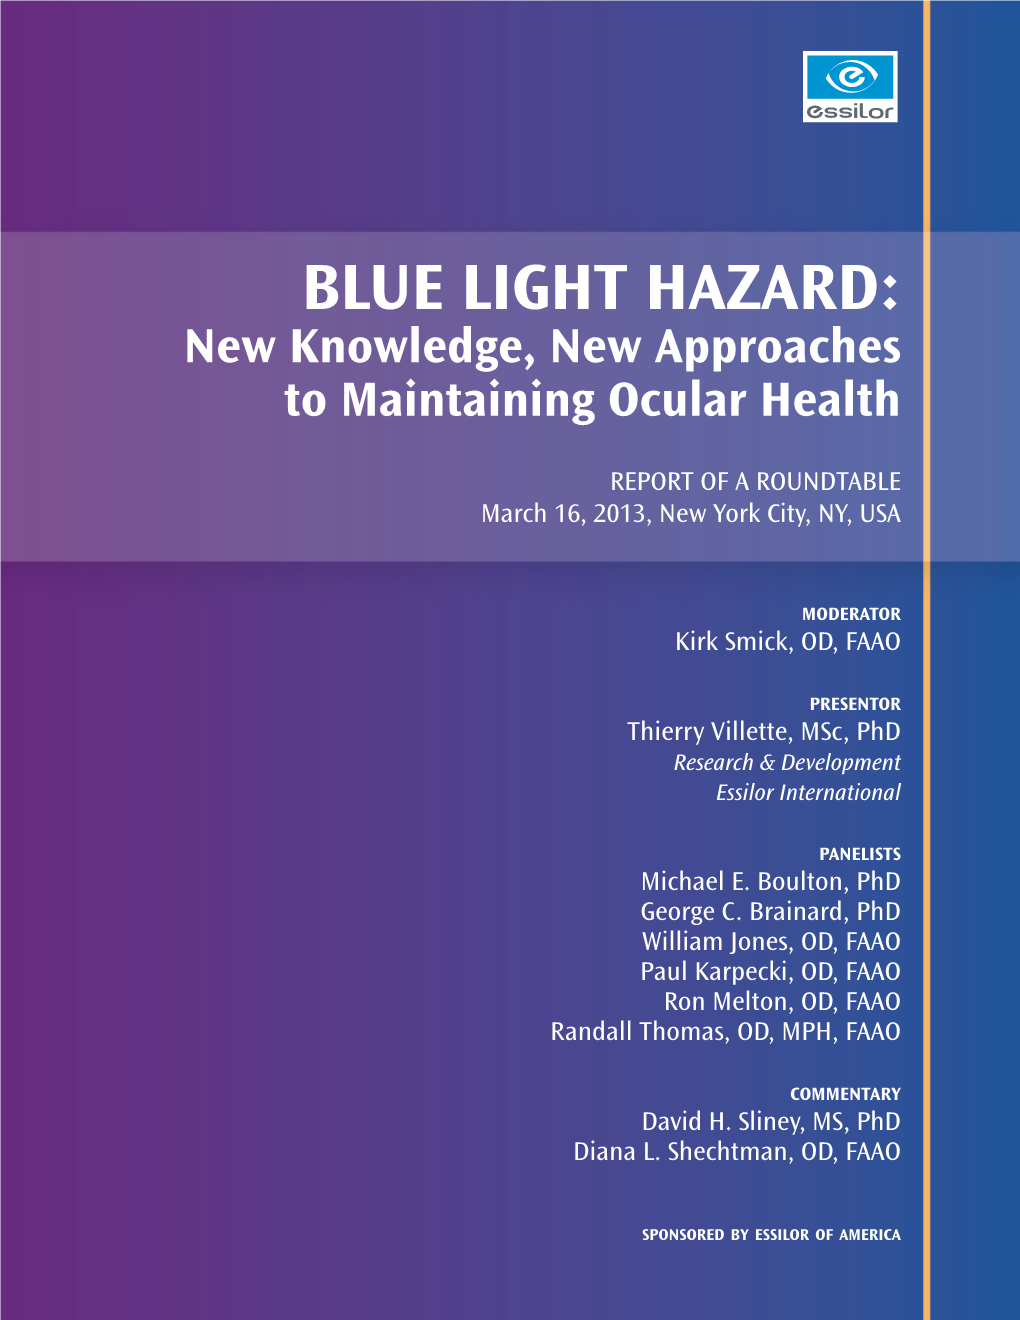 Blue Light Hazard: New Knowledge, New Approaches to Maintaining Ocular Health